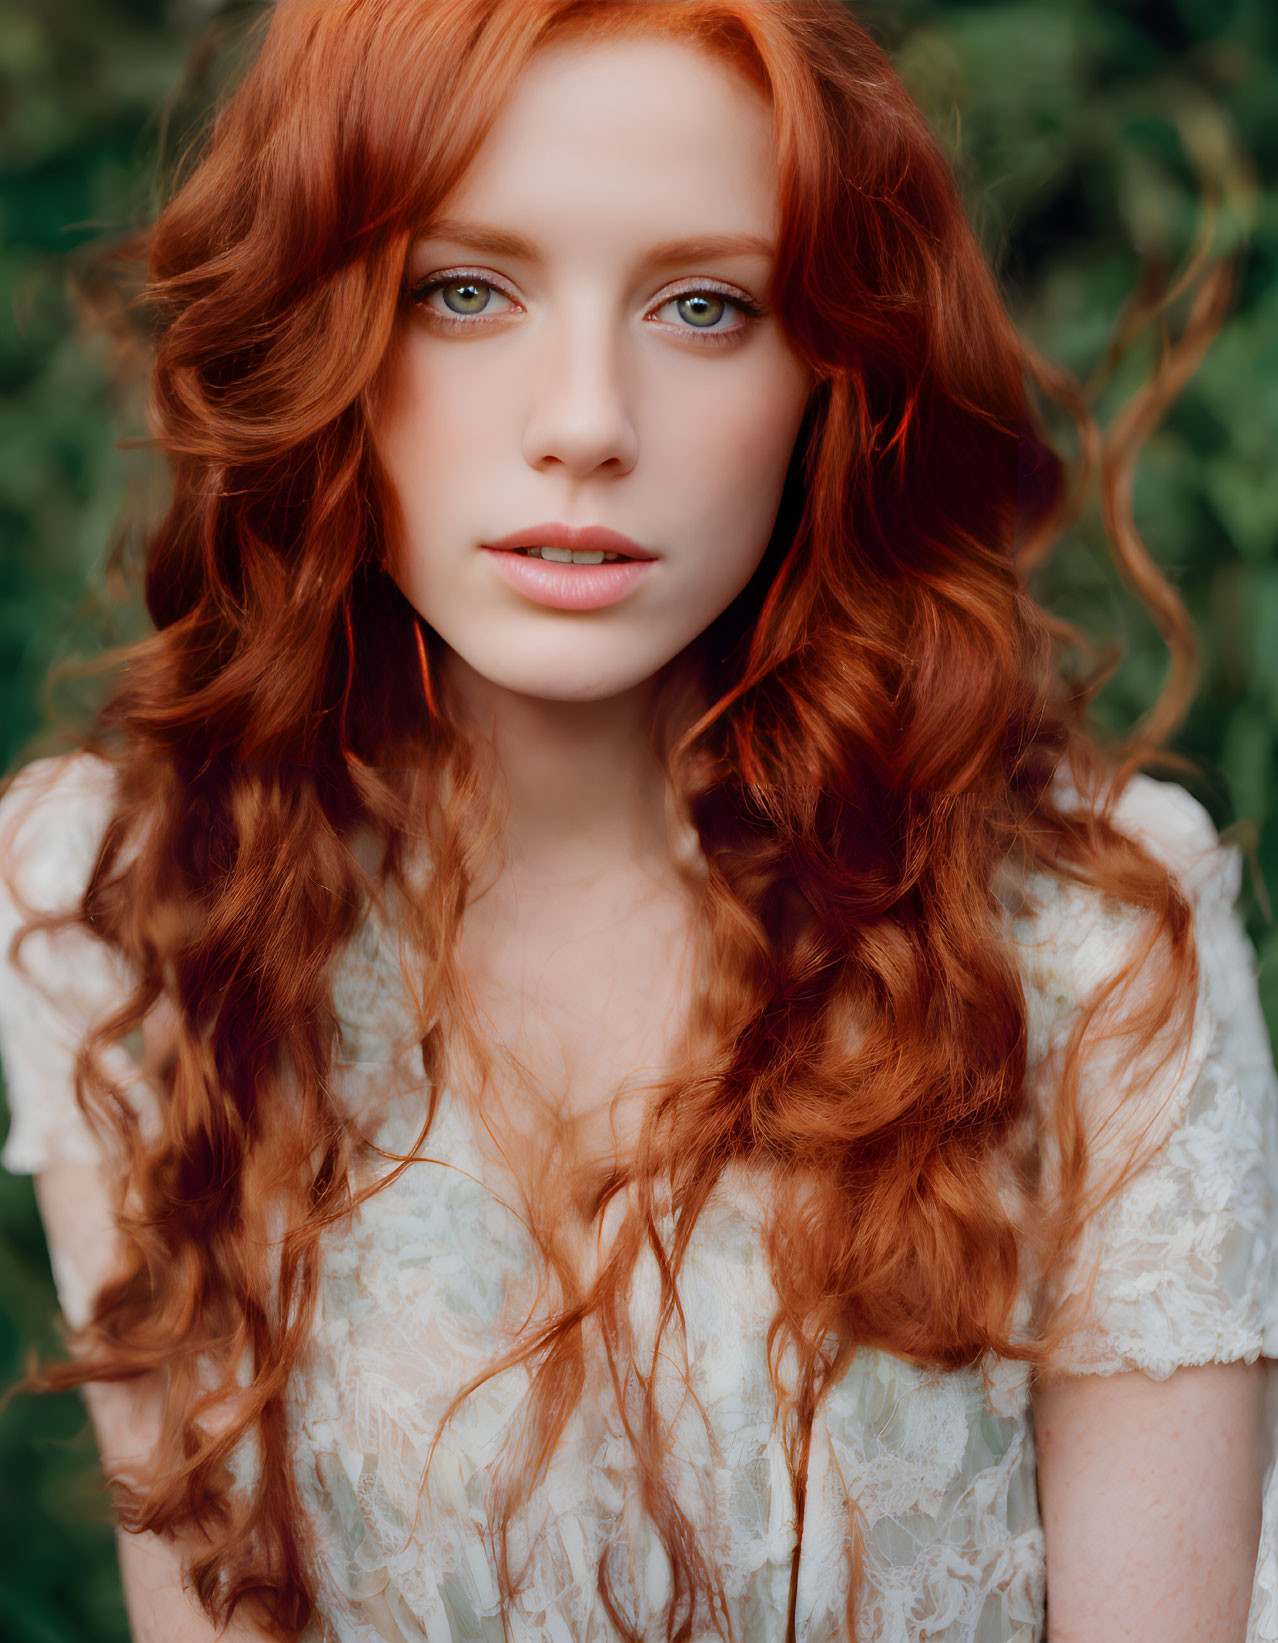 Woman with Long Curly Red Hair in White Lace Outfit against Green Foliage